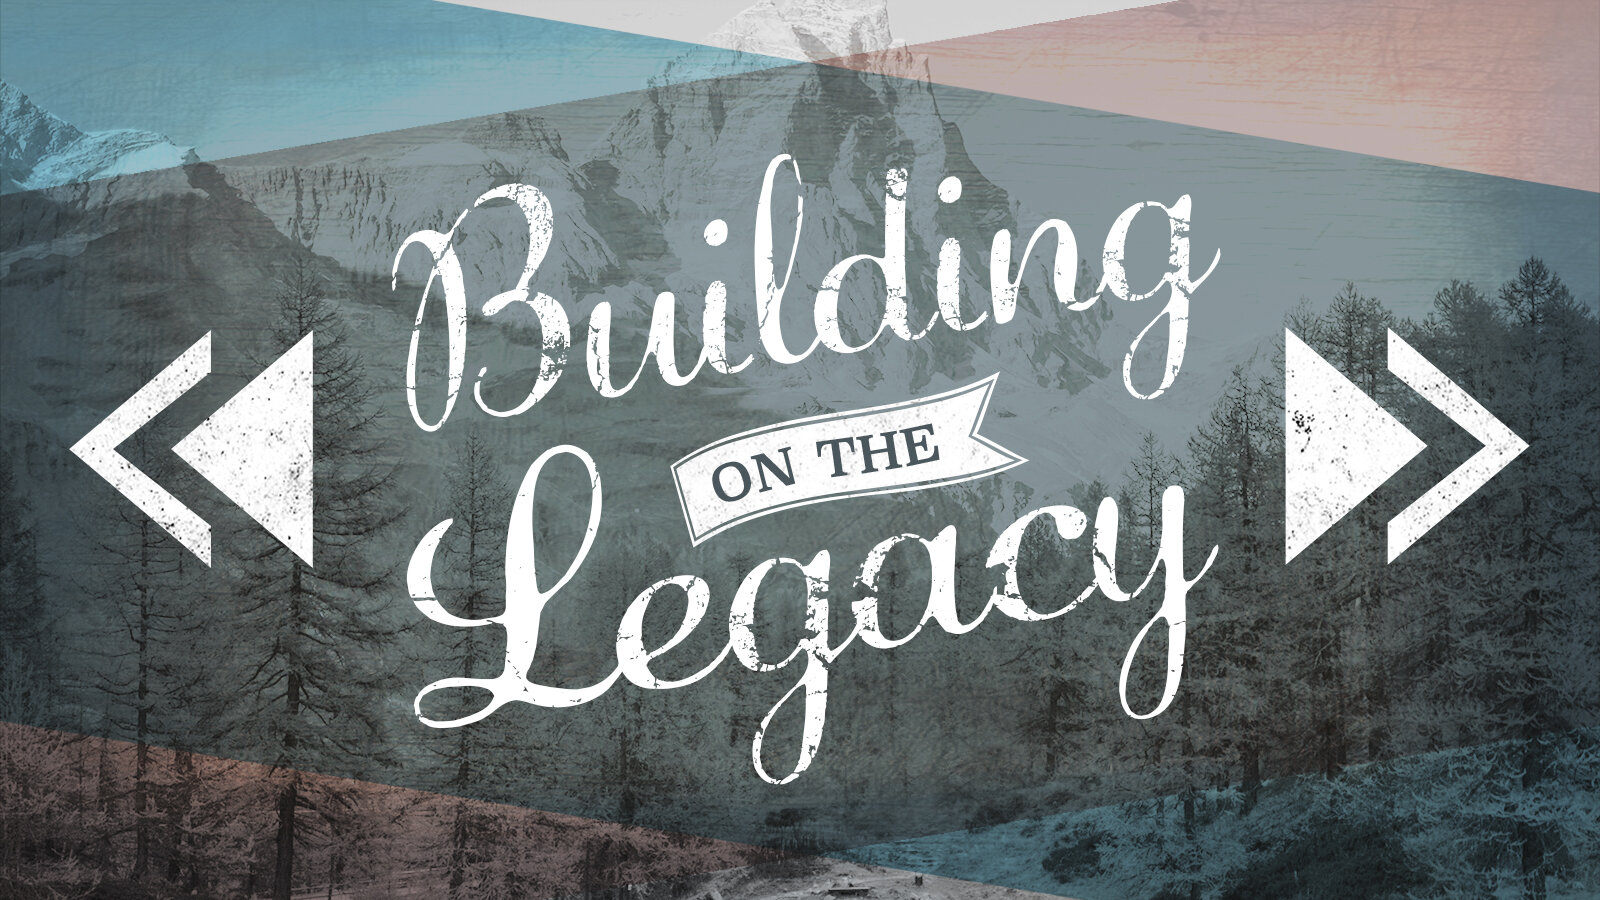 Message Series: Building on the Legacy